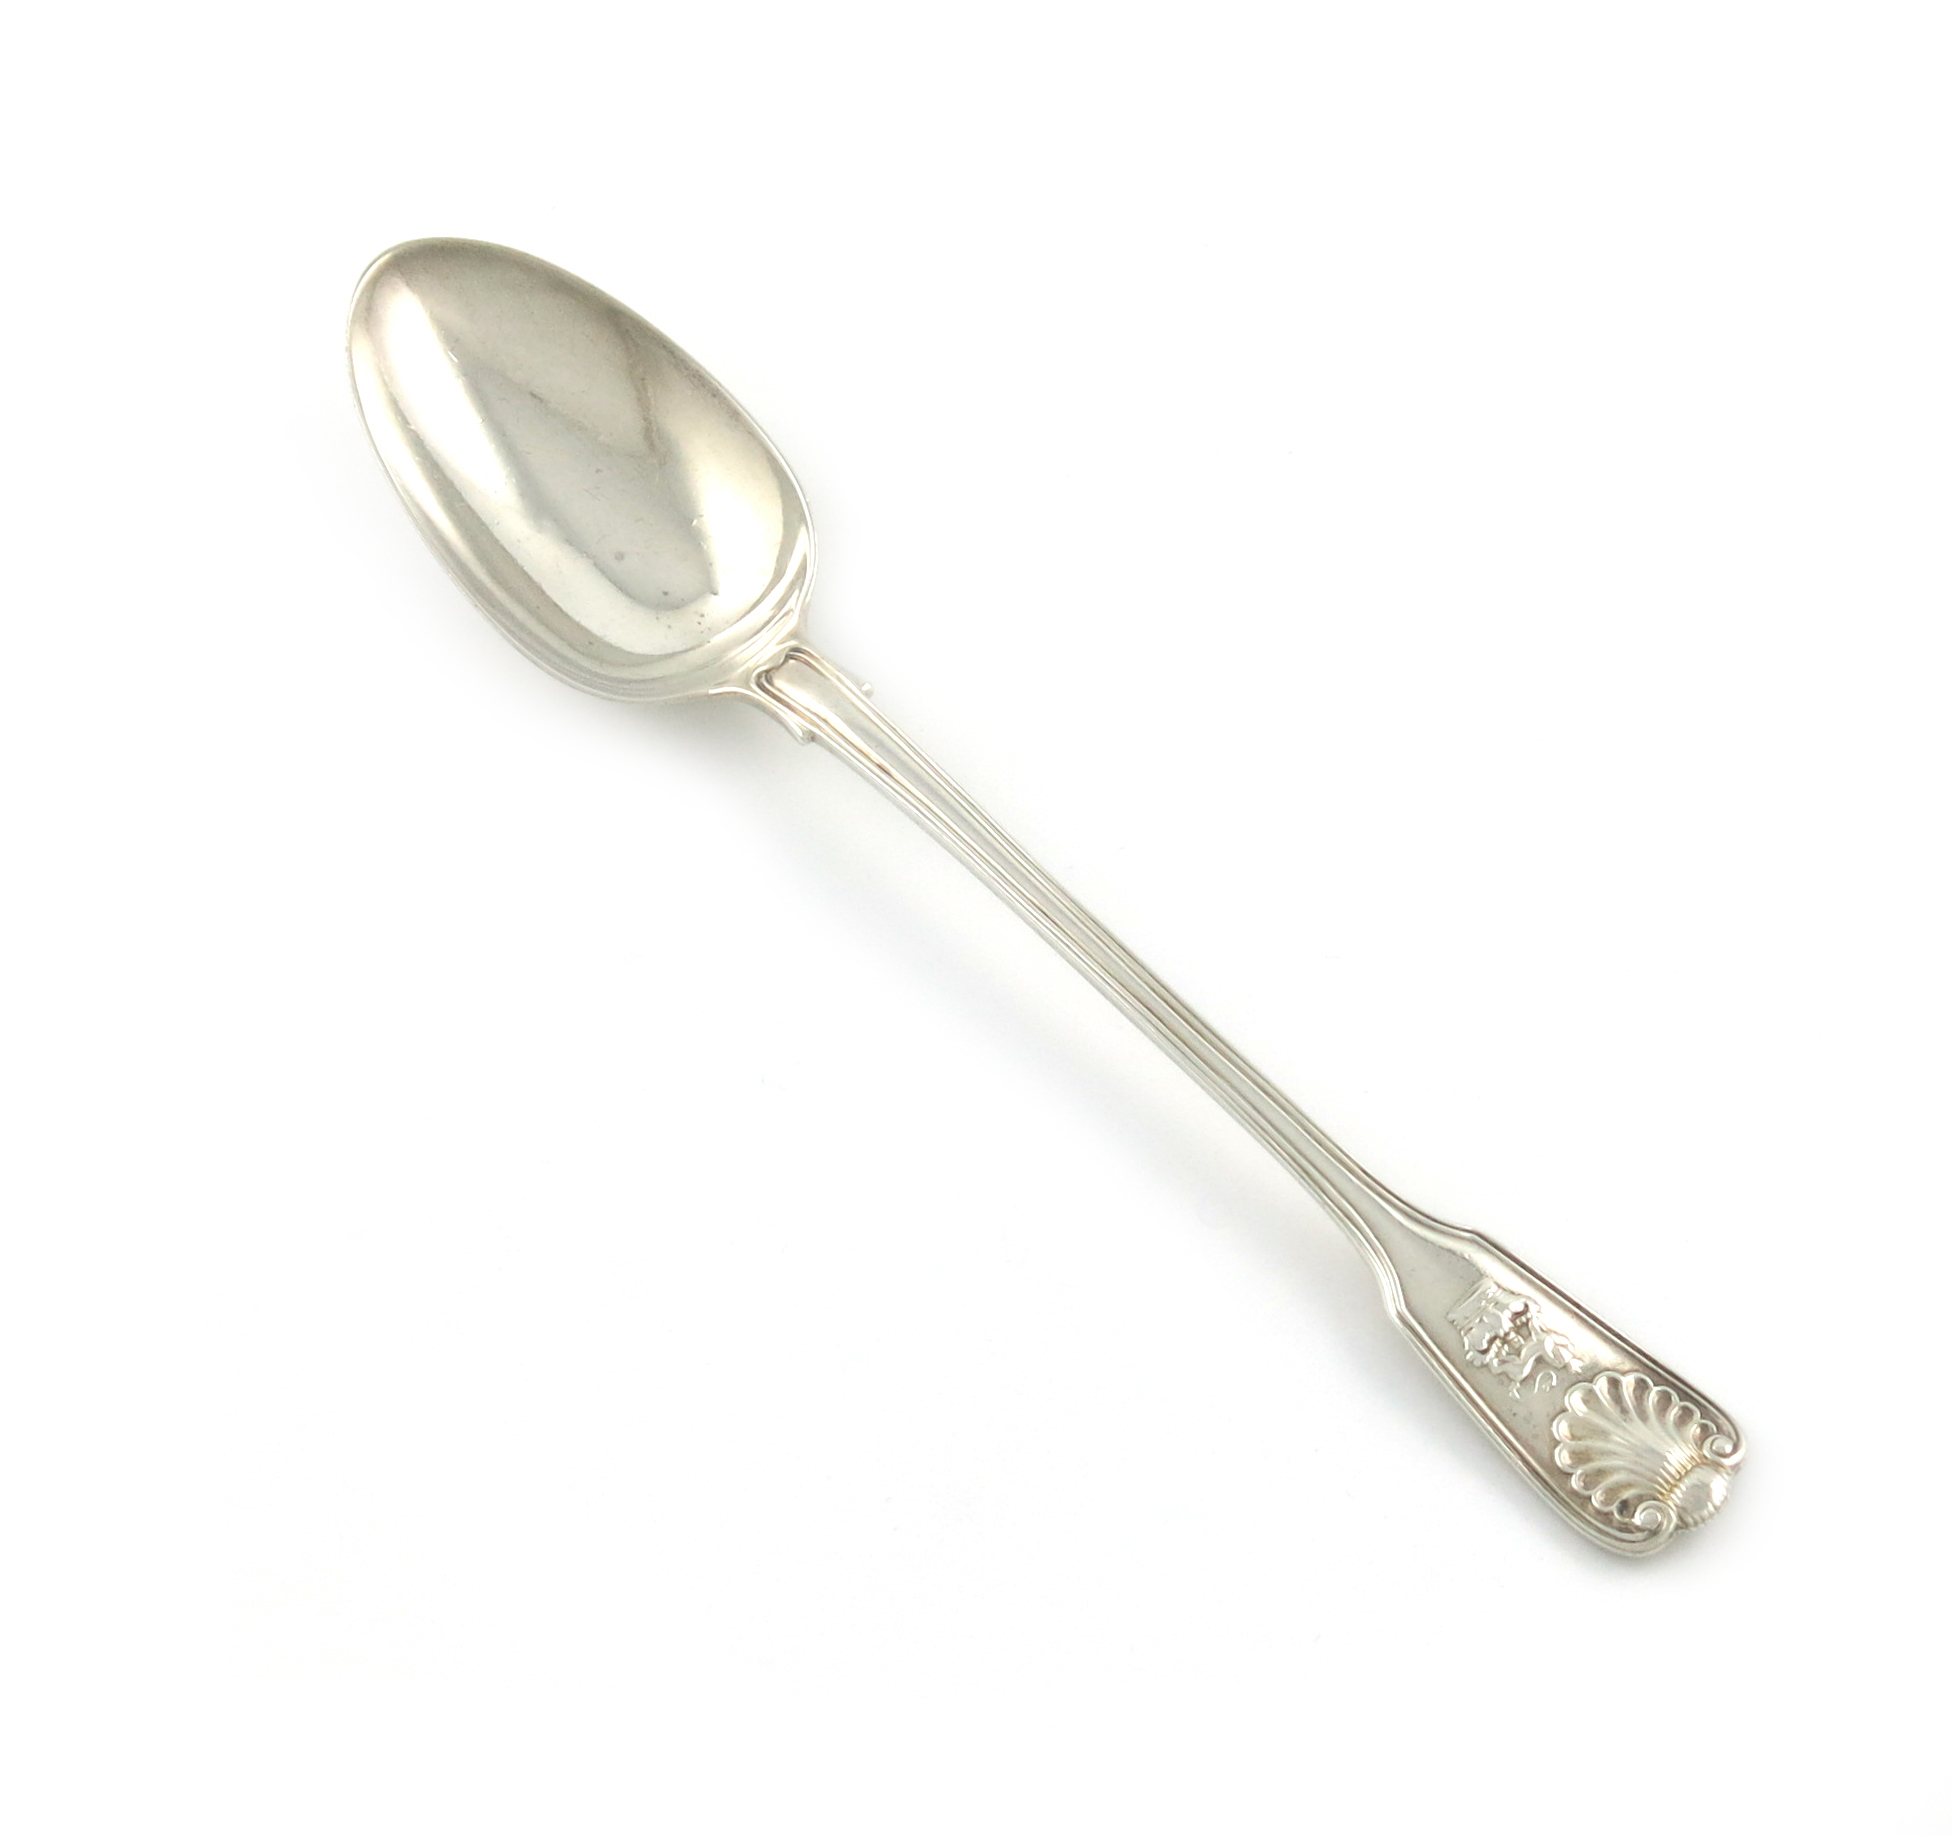 A Victorian silver regimental Fiddle, Thread and Shell pattern serving spoon, The Royal Marines,